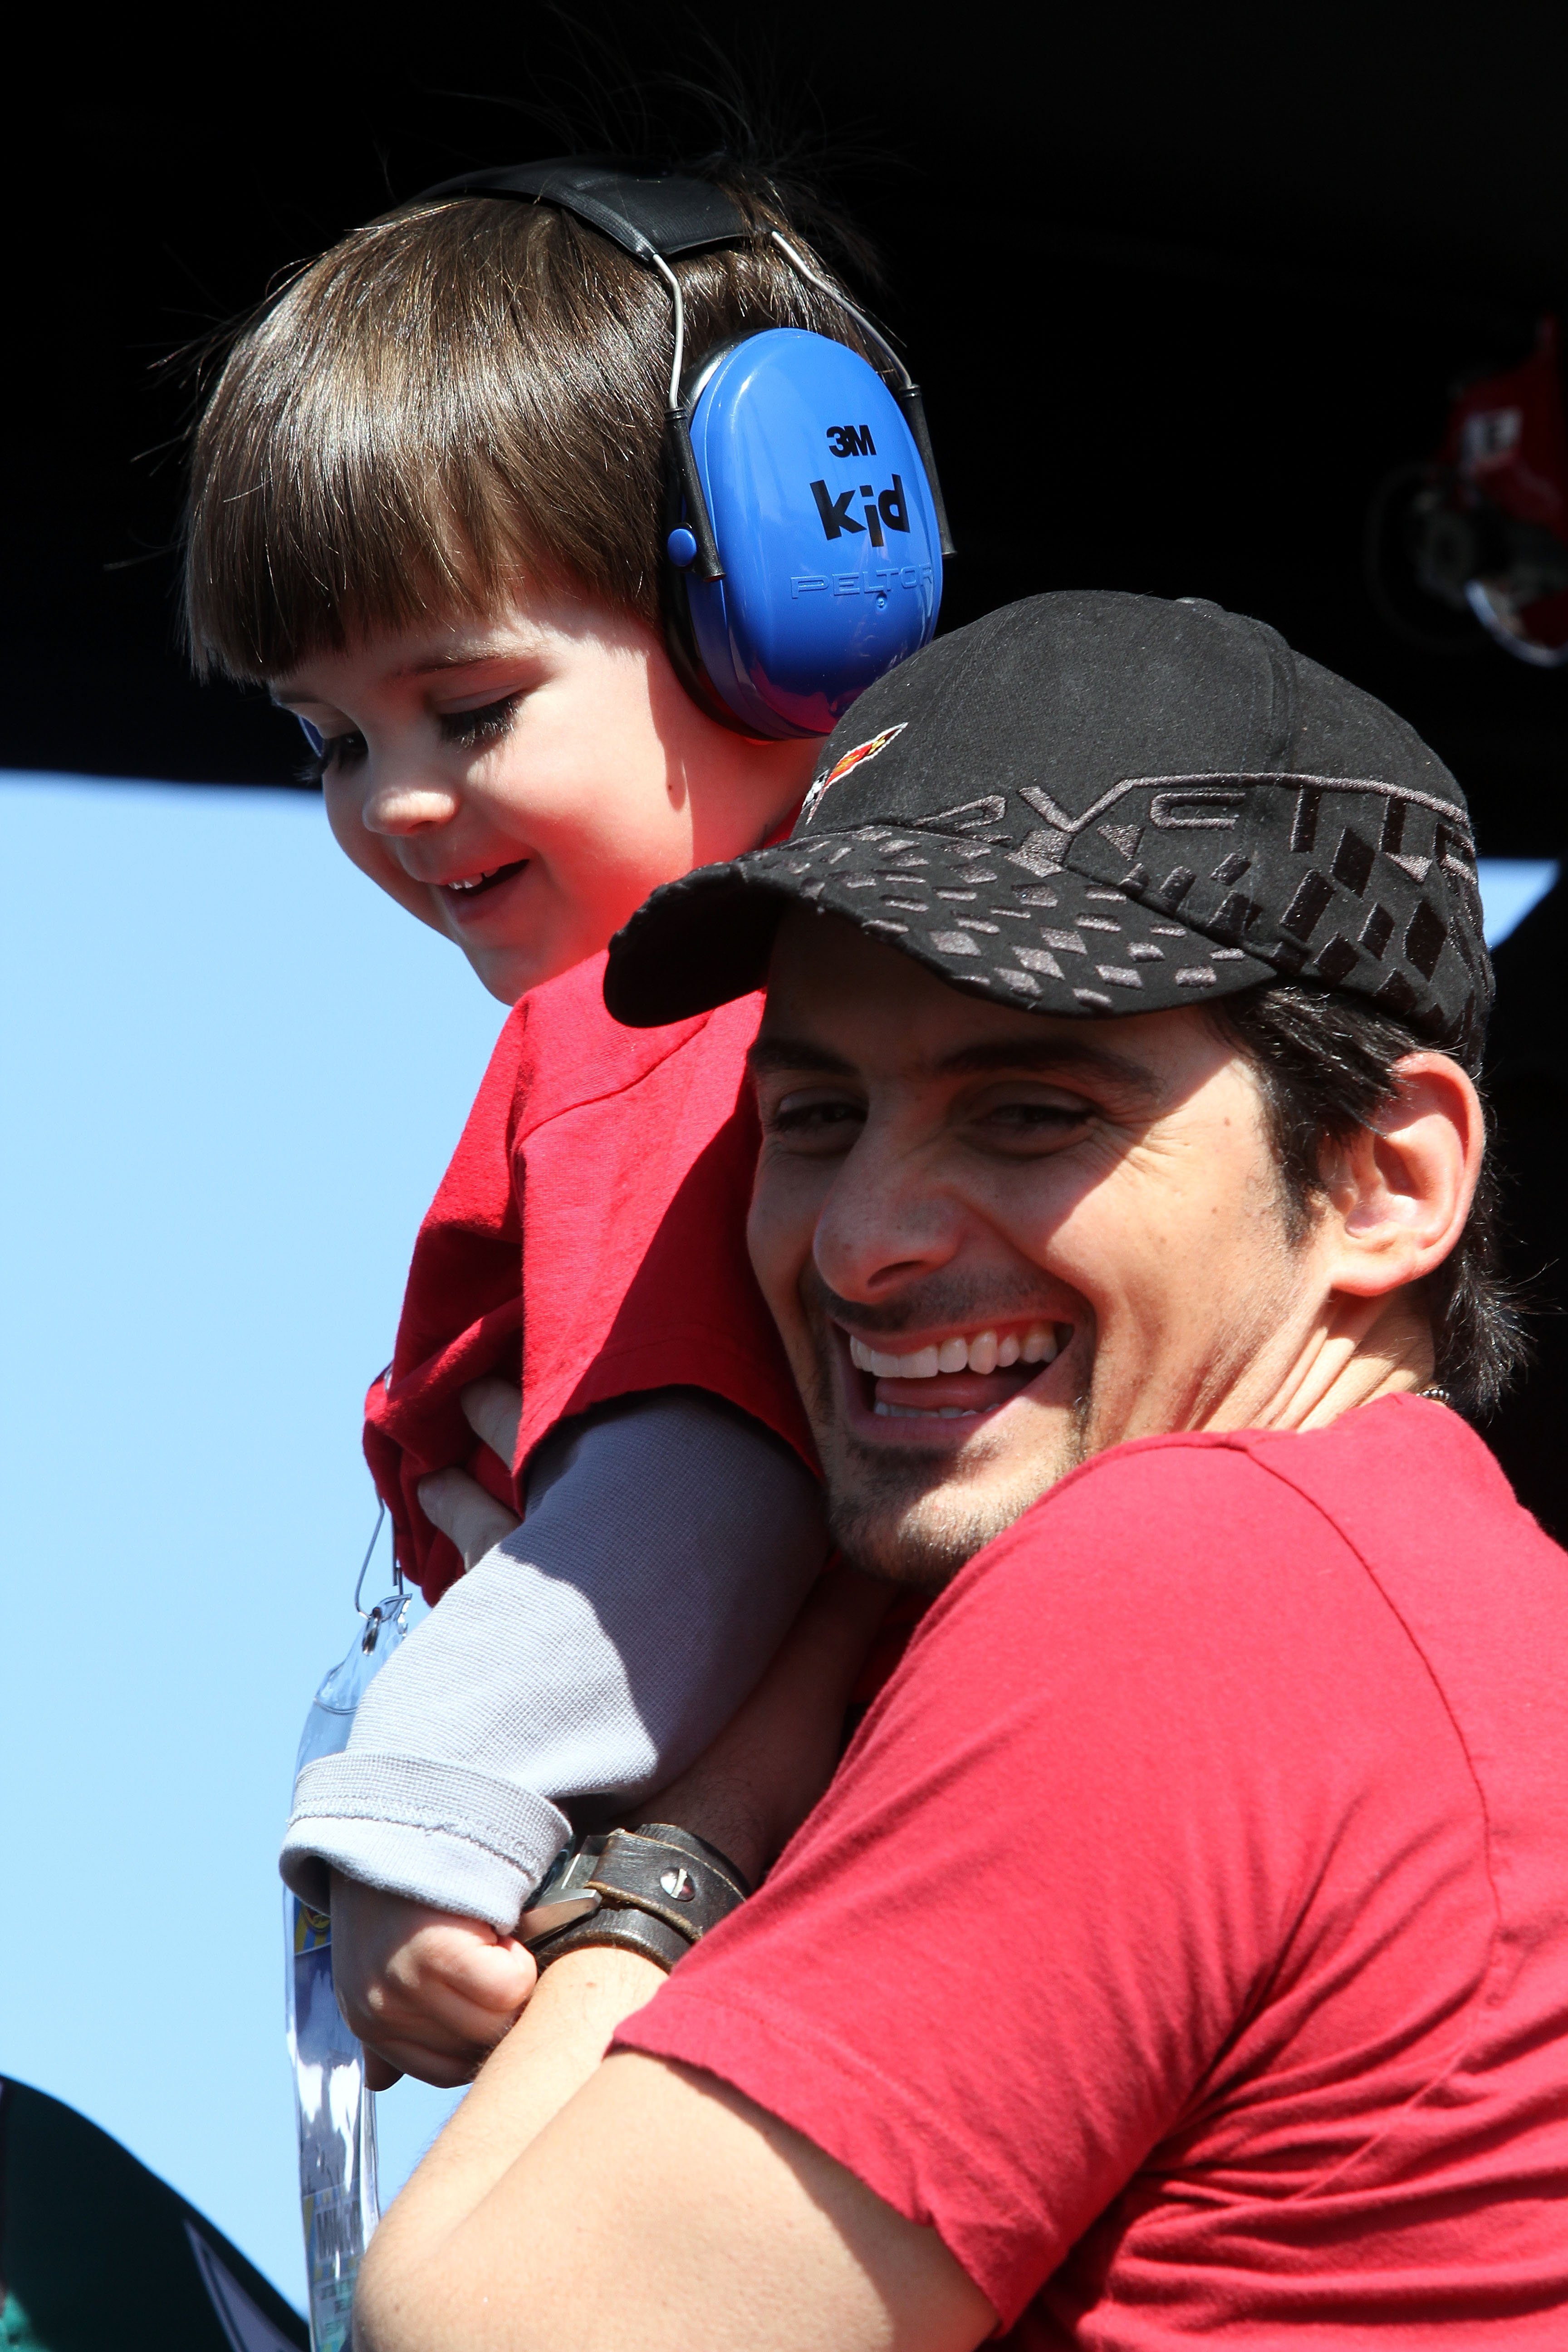 Brad Paisley looks on with his son during the NASCAR Sprint Cup Series Daytona 500 at Daytona International Speedway on February 20, 2011, in Daytona Beach, Florida. | Source: Getty Images